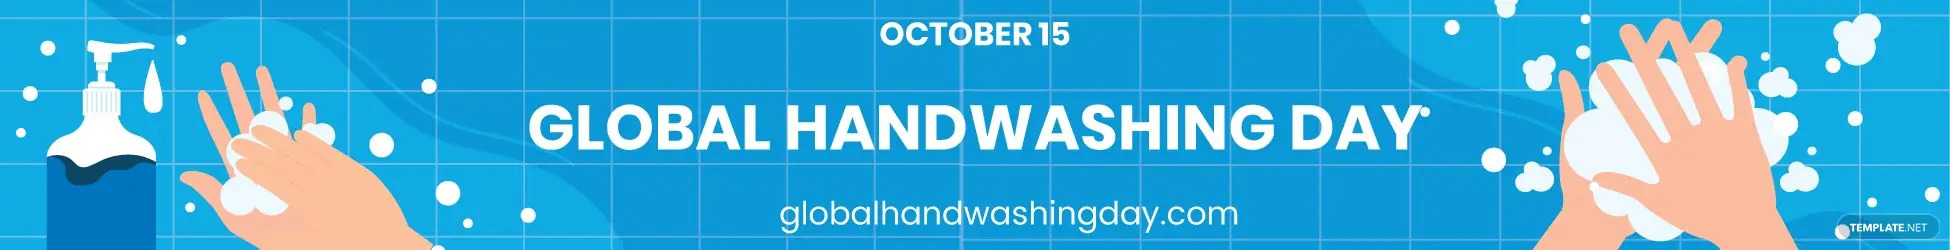 global-handwashing-day-website-banner-ideas-and-examples